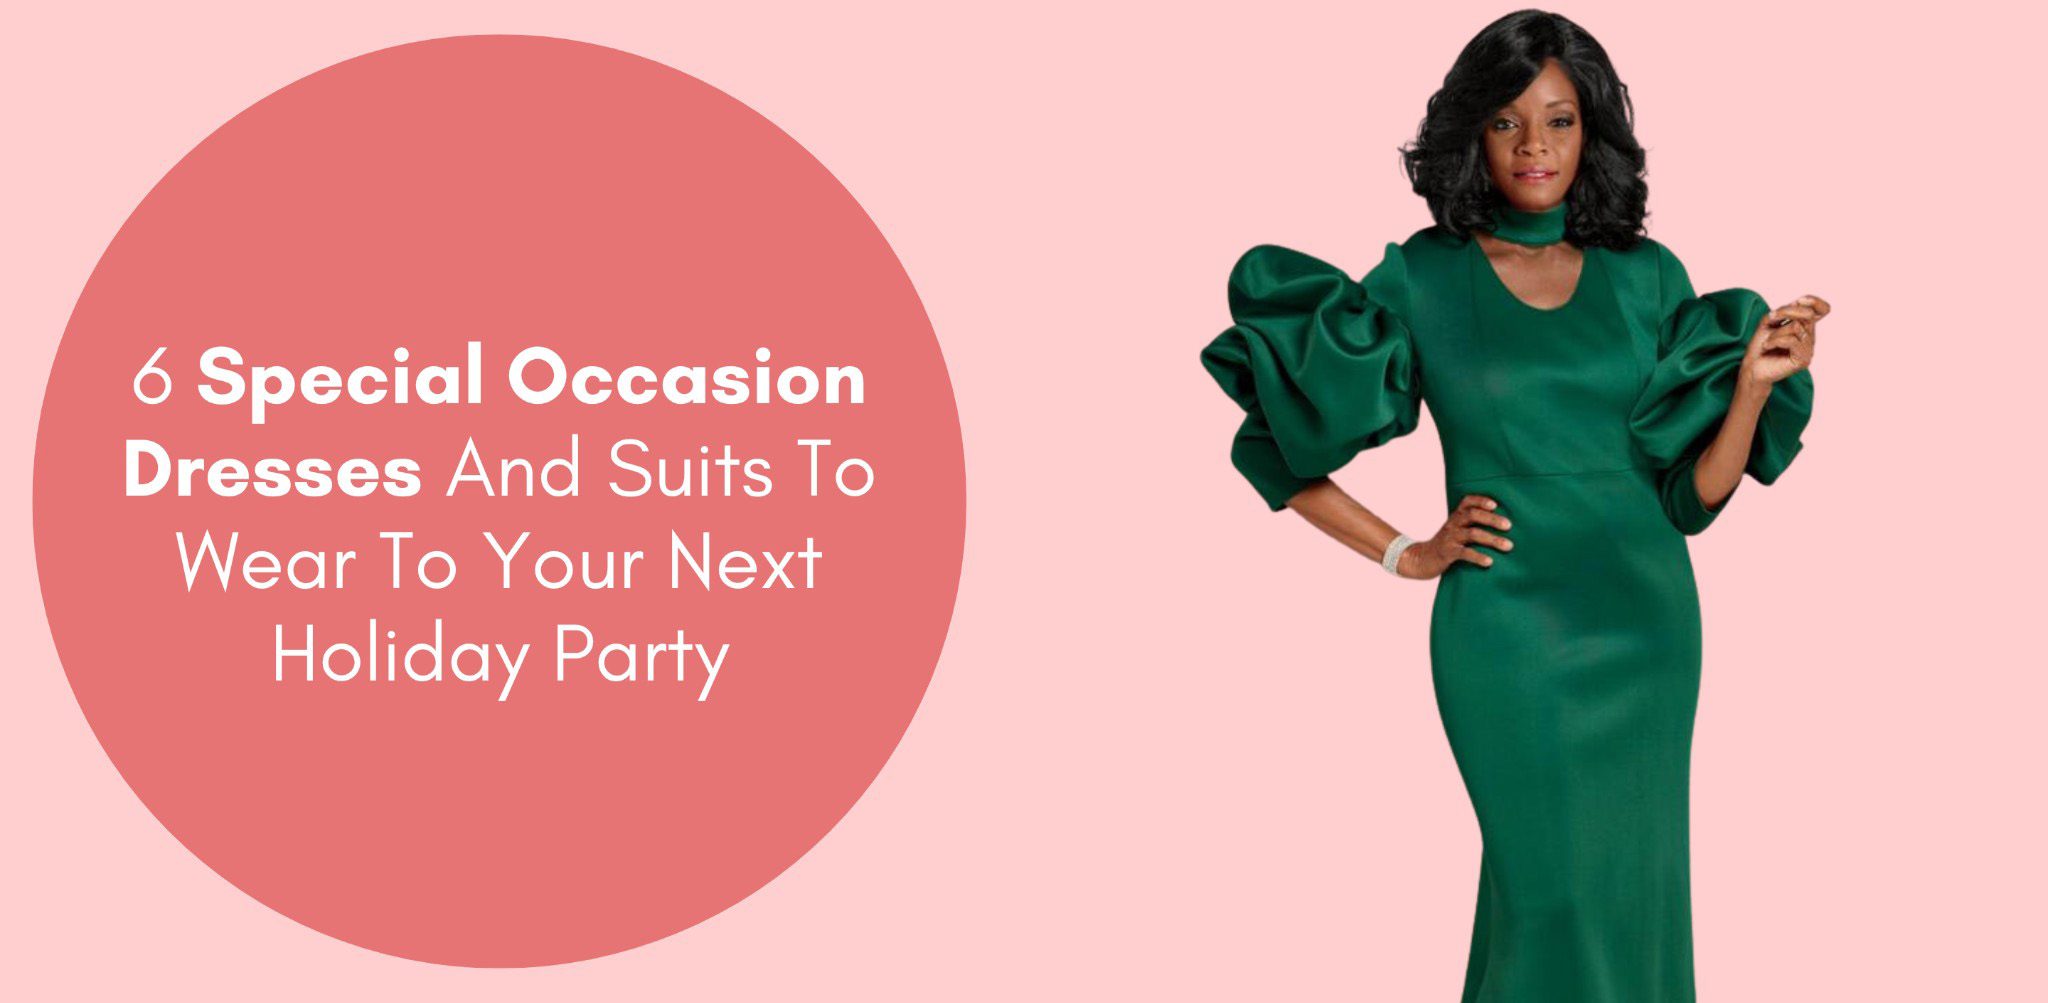 6 Special Occasion Dresses And Suits To Wear To Your Next Holiday Party ...